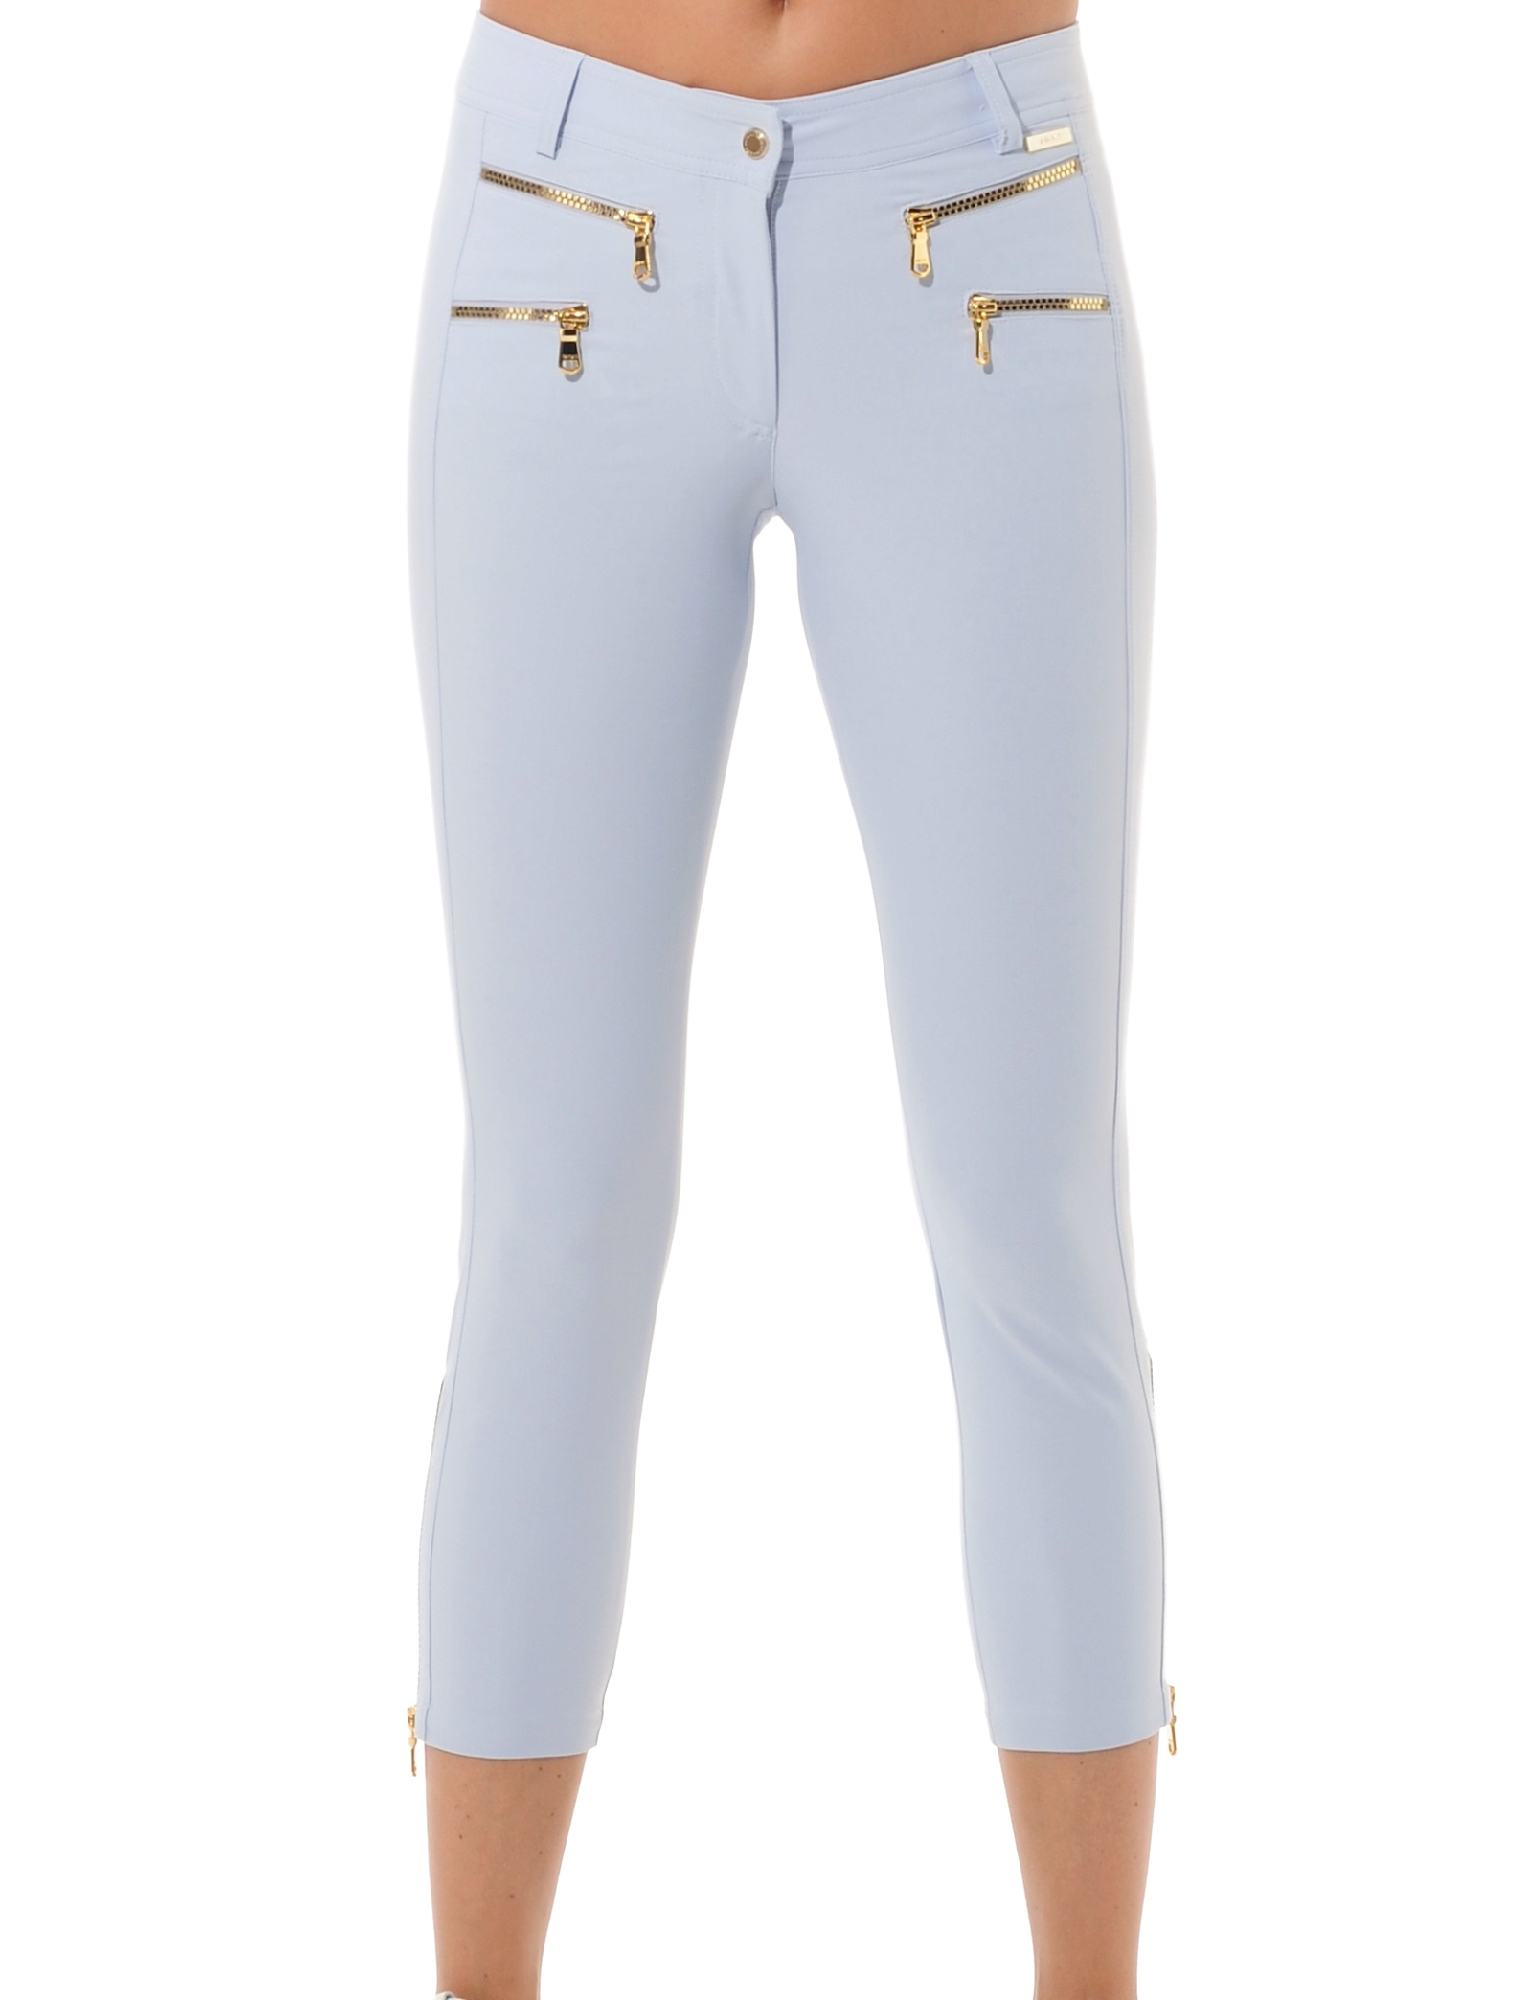 4way stretch shiny gold cube double zip cropped pants cloud 